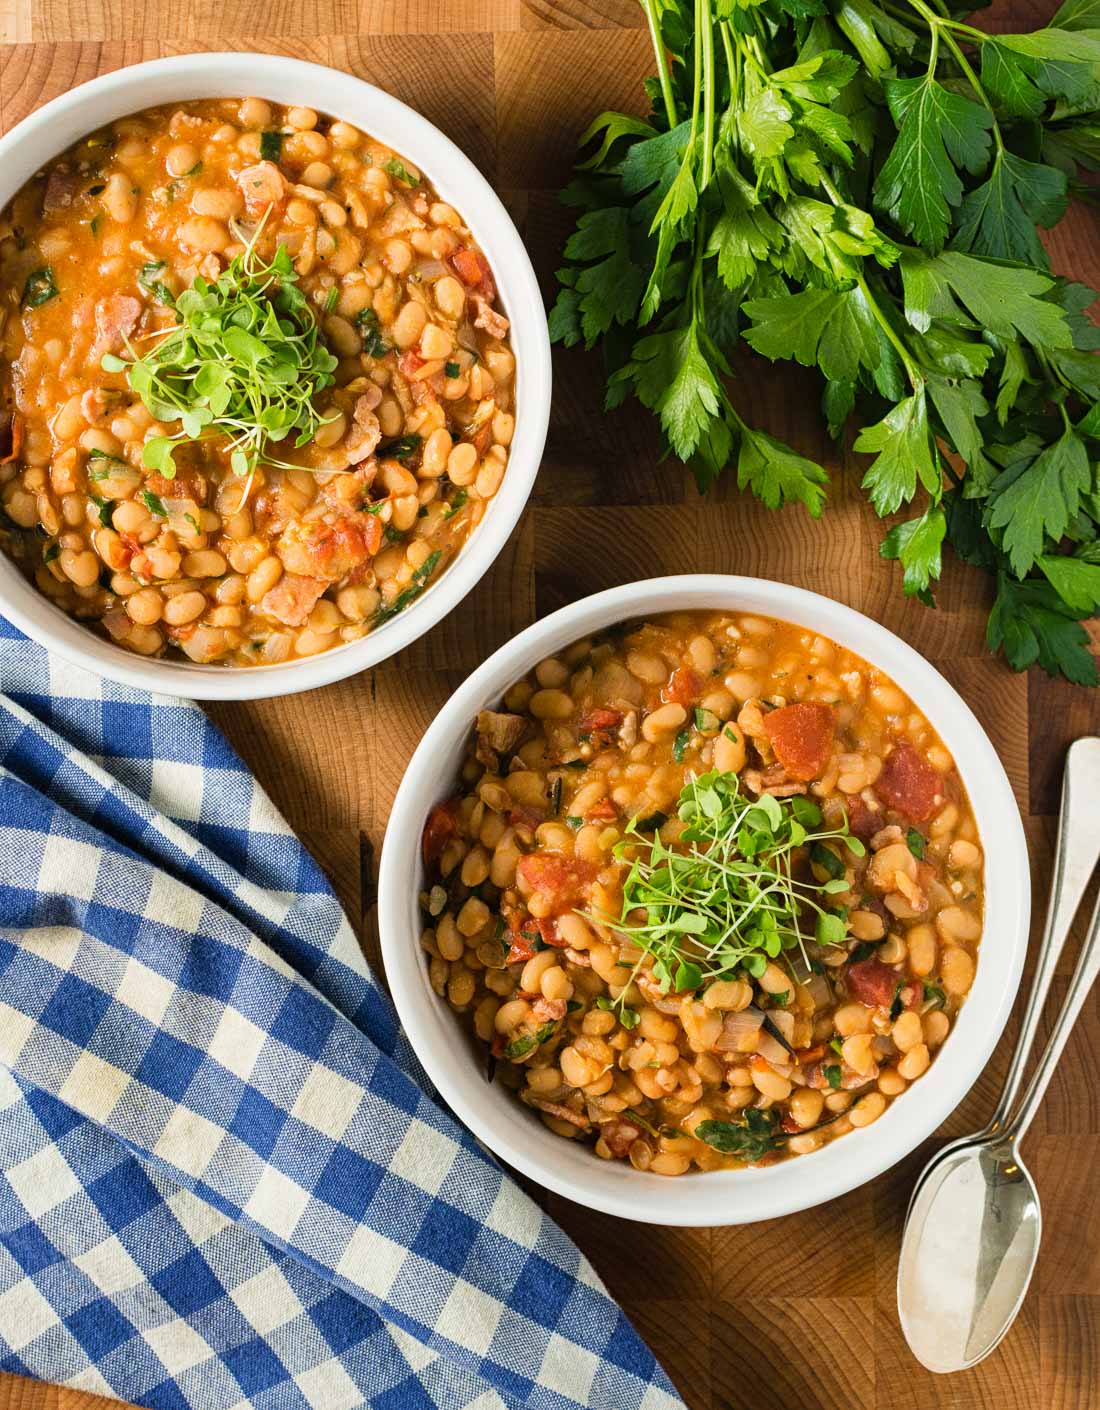 Rosemary, thyme, parsley, onion and garlic all come together in this warming and deeply satisfying savory navy bean stew.